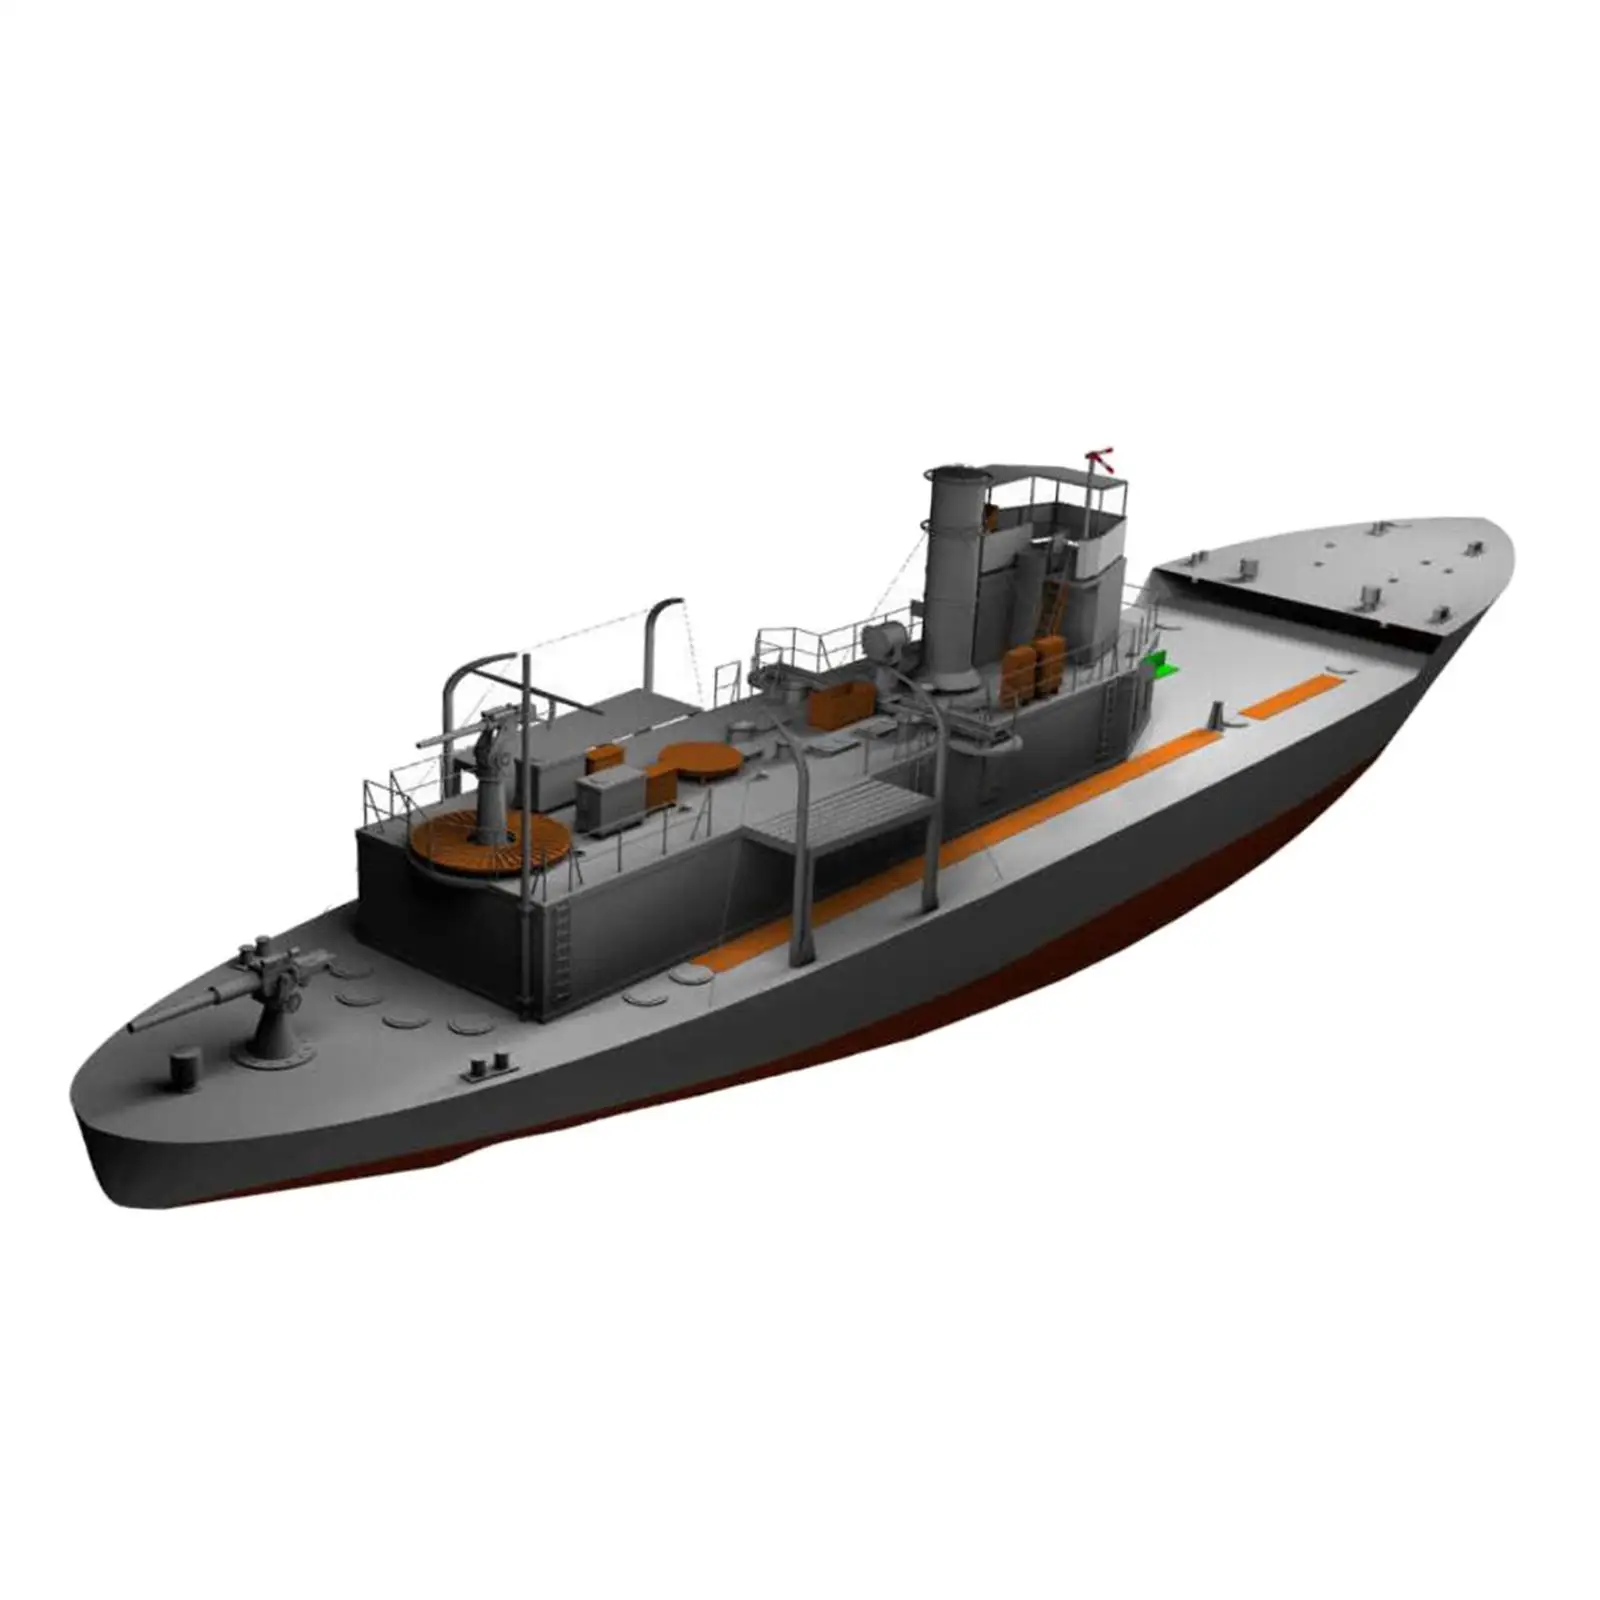 Patrol Boat Arts Crafts Home Decor Ship Model Boat for Adults Kids Gift